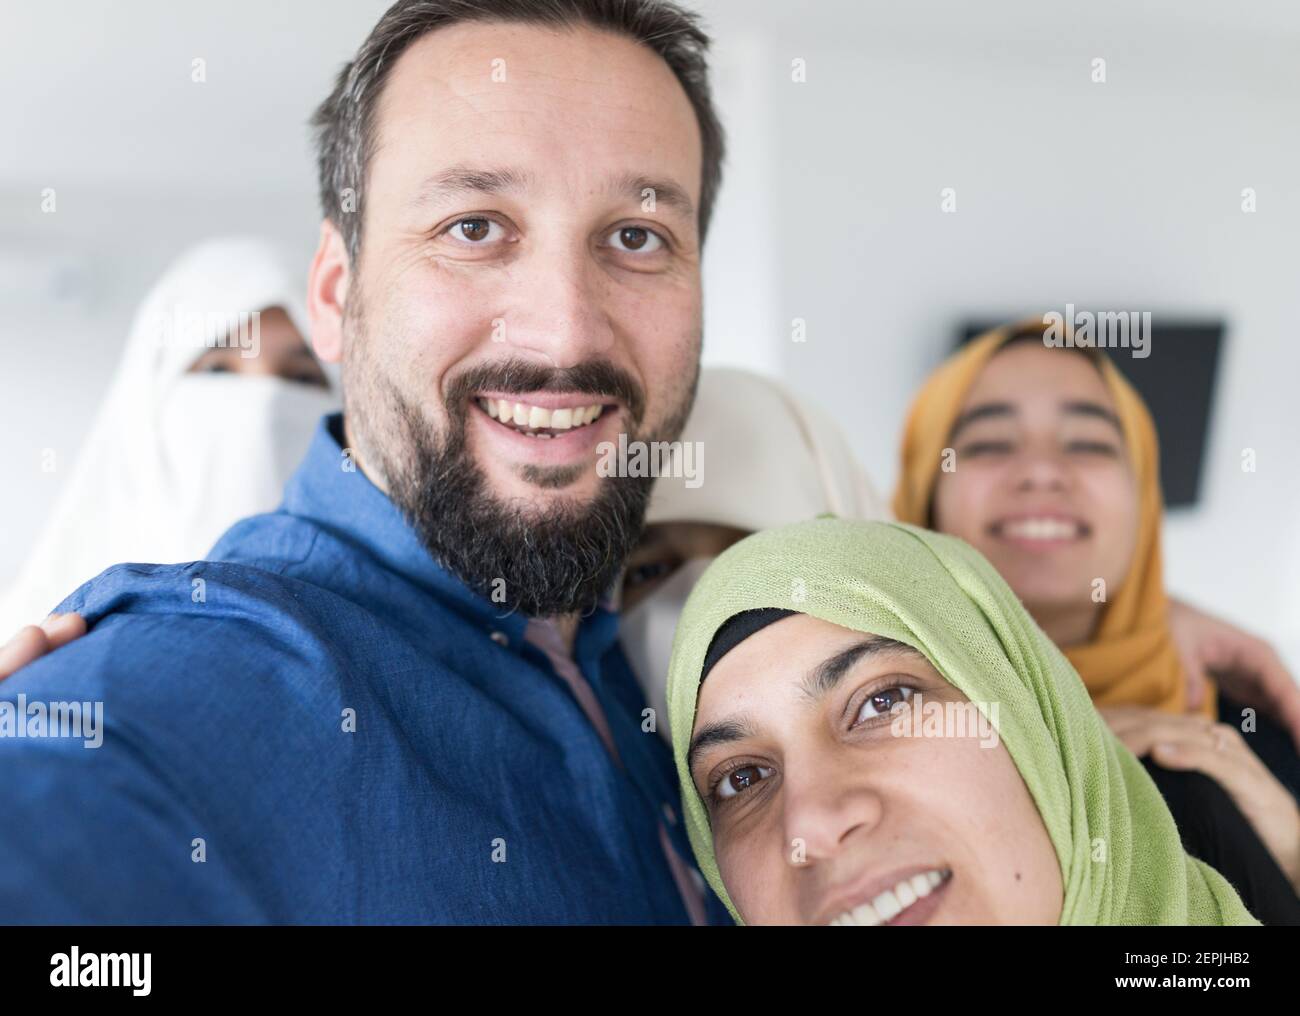 Muslim man with 4 wives portrait ,quality photo Stock Photo